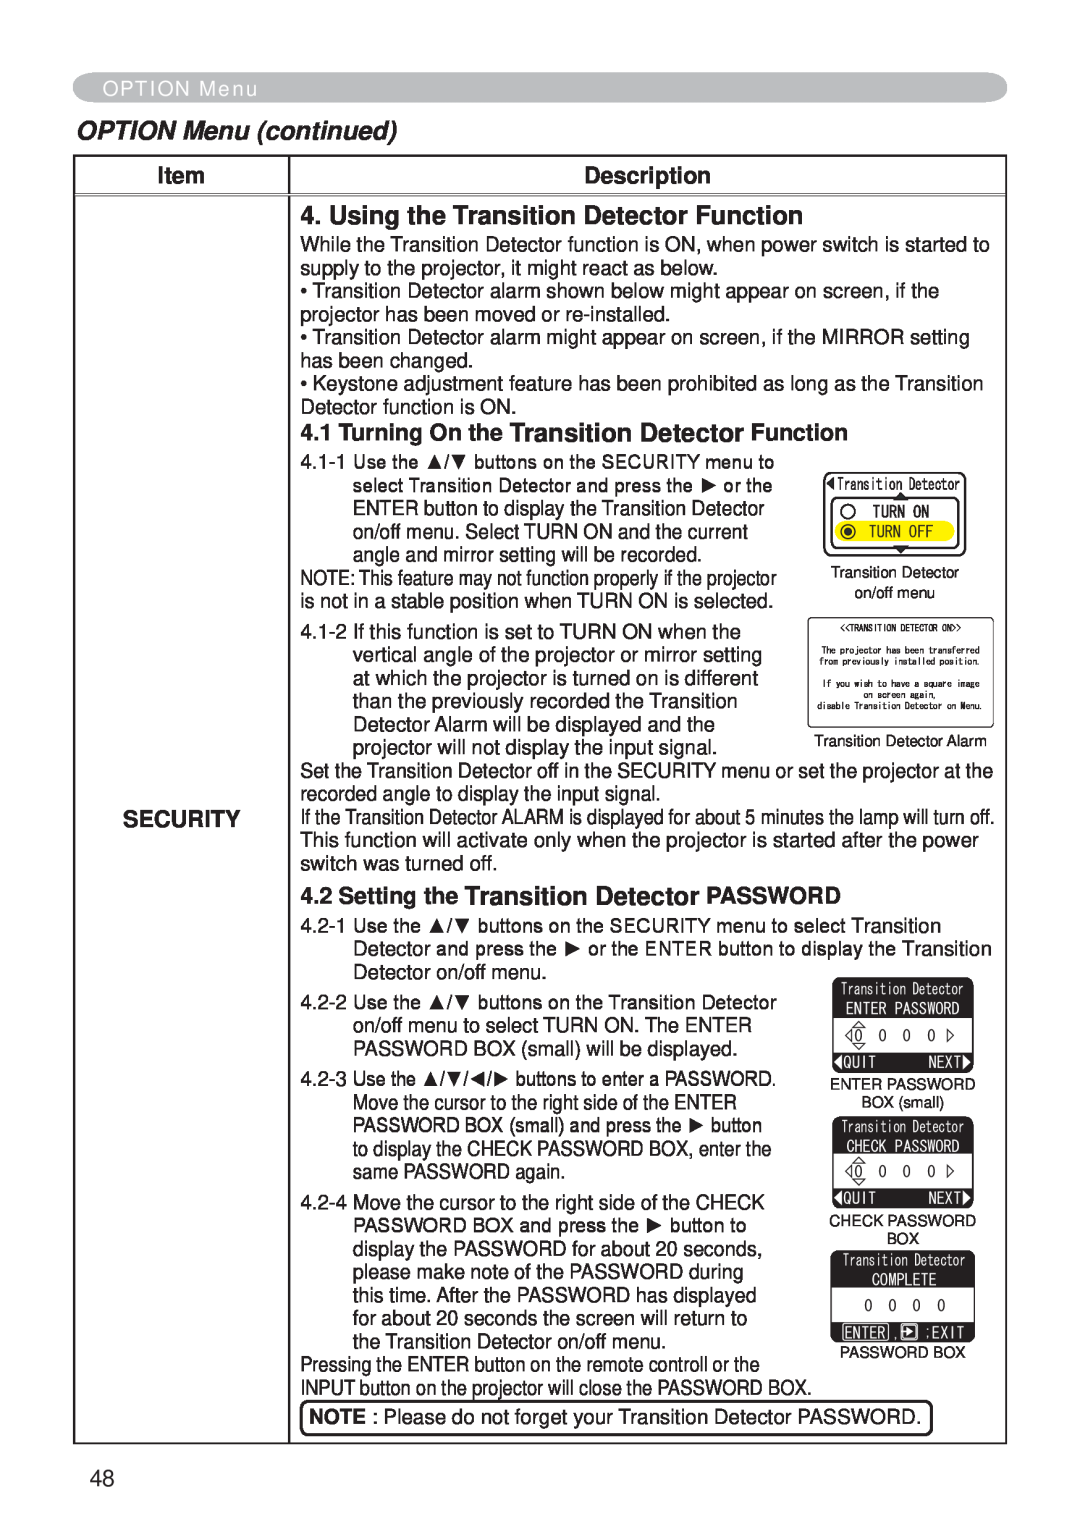 Hitachi CP-X265 user manual Using the Transition Detector Function, OPTION Menu continued, Description, Security 